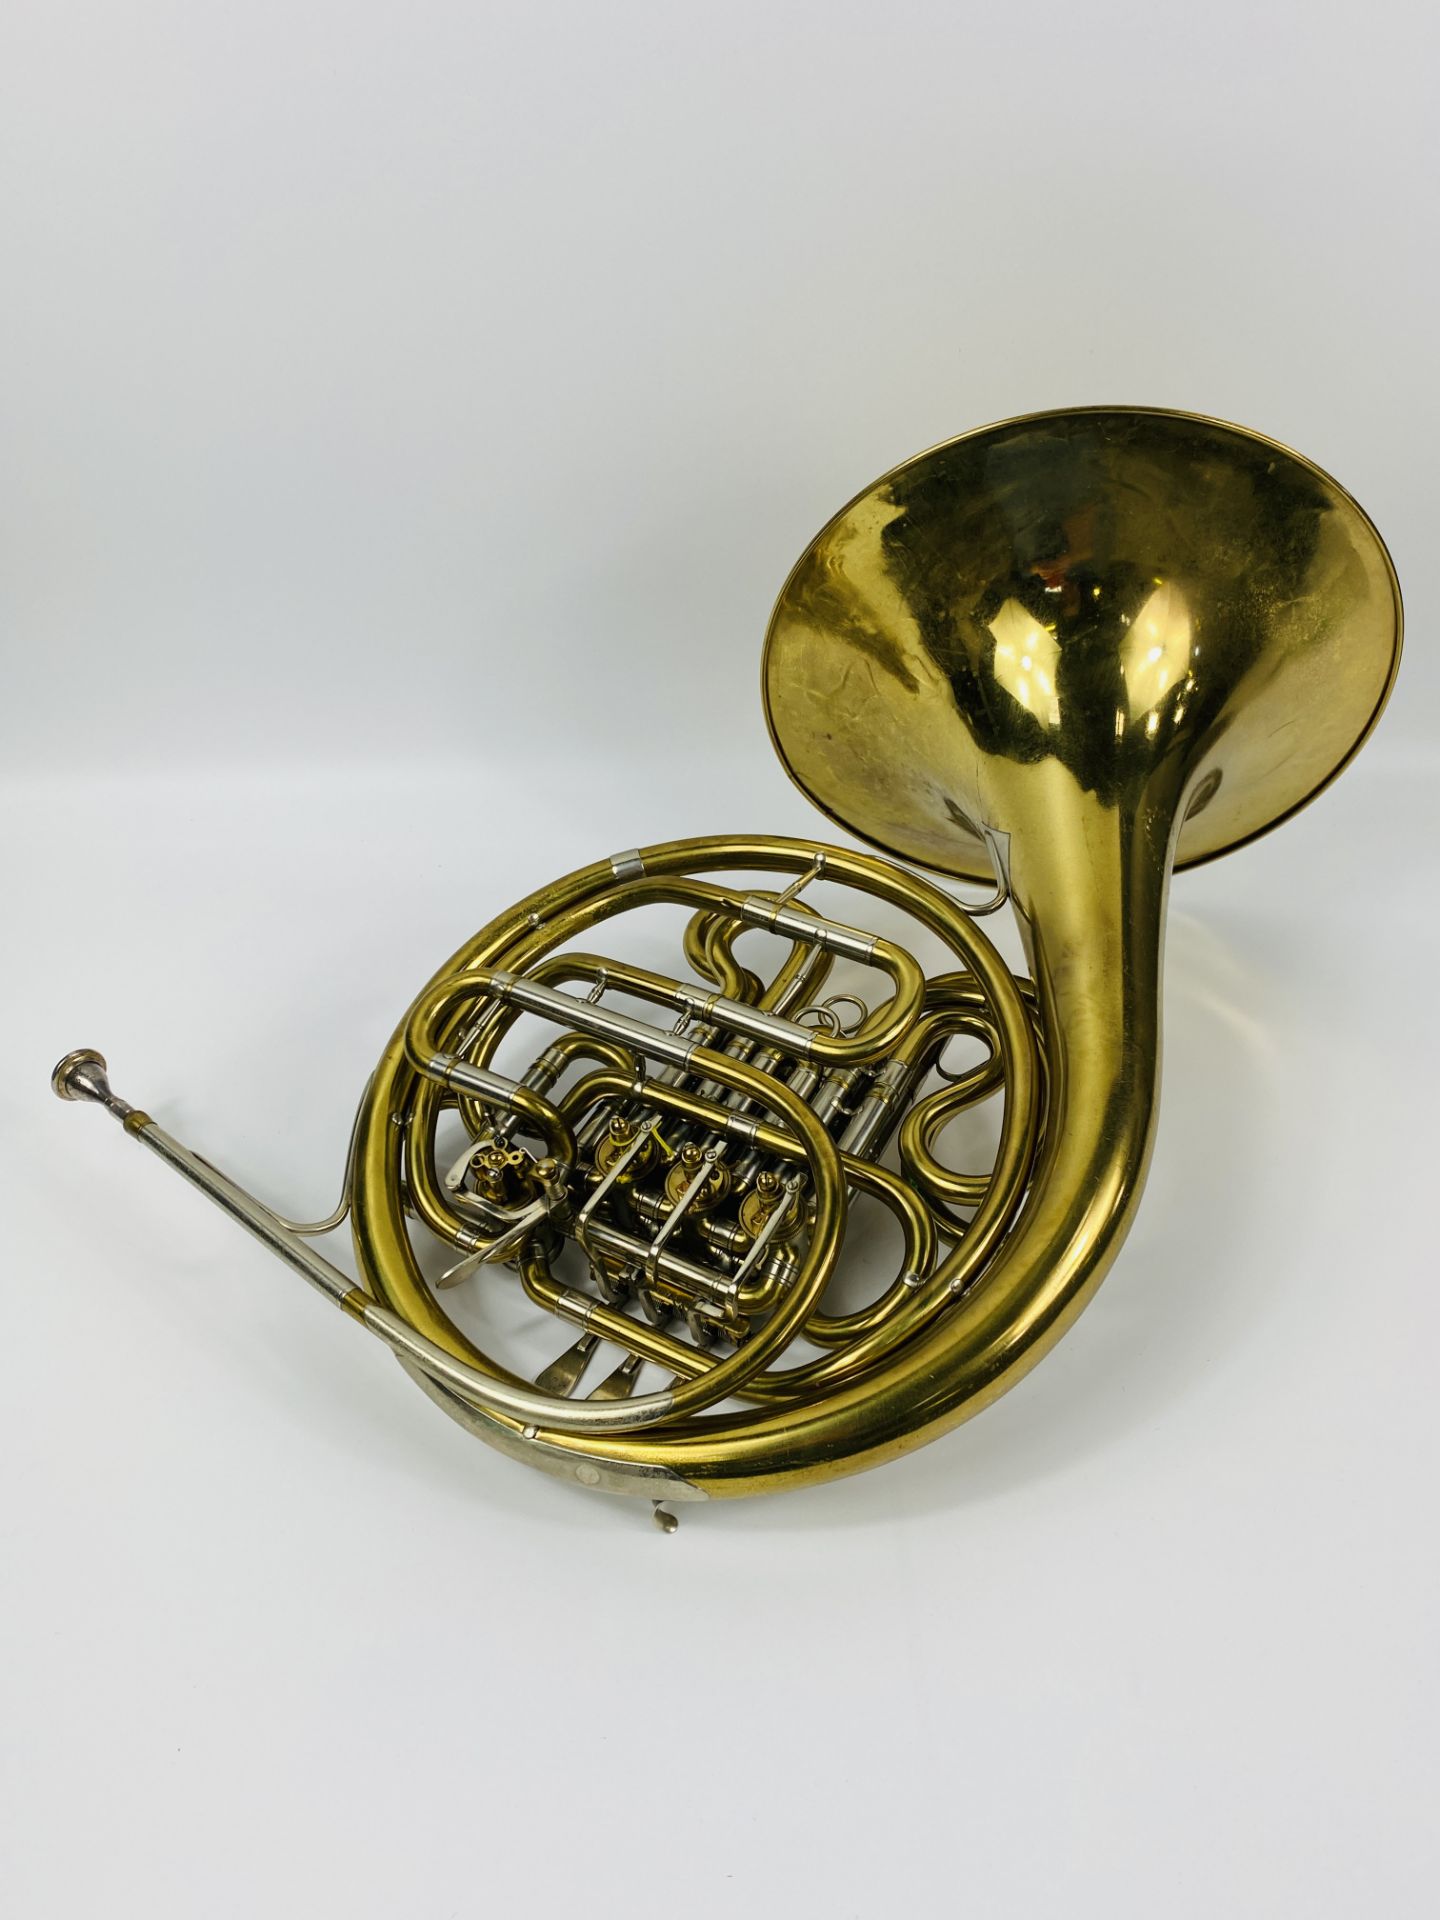 French horn in carry case - Image 2 of 8